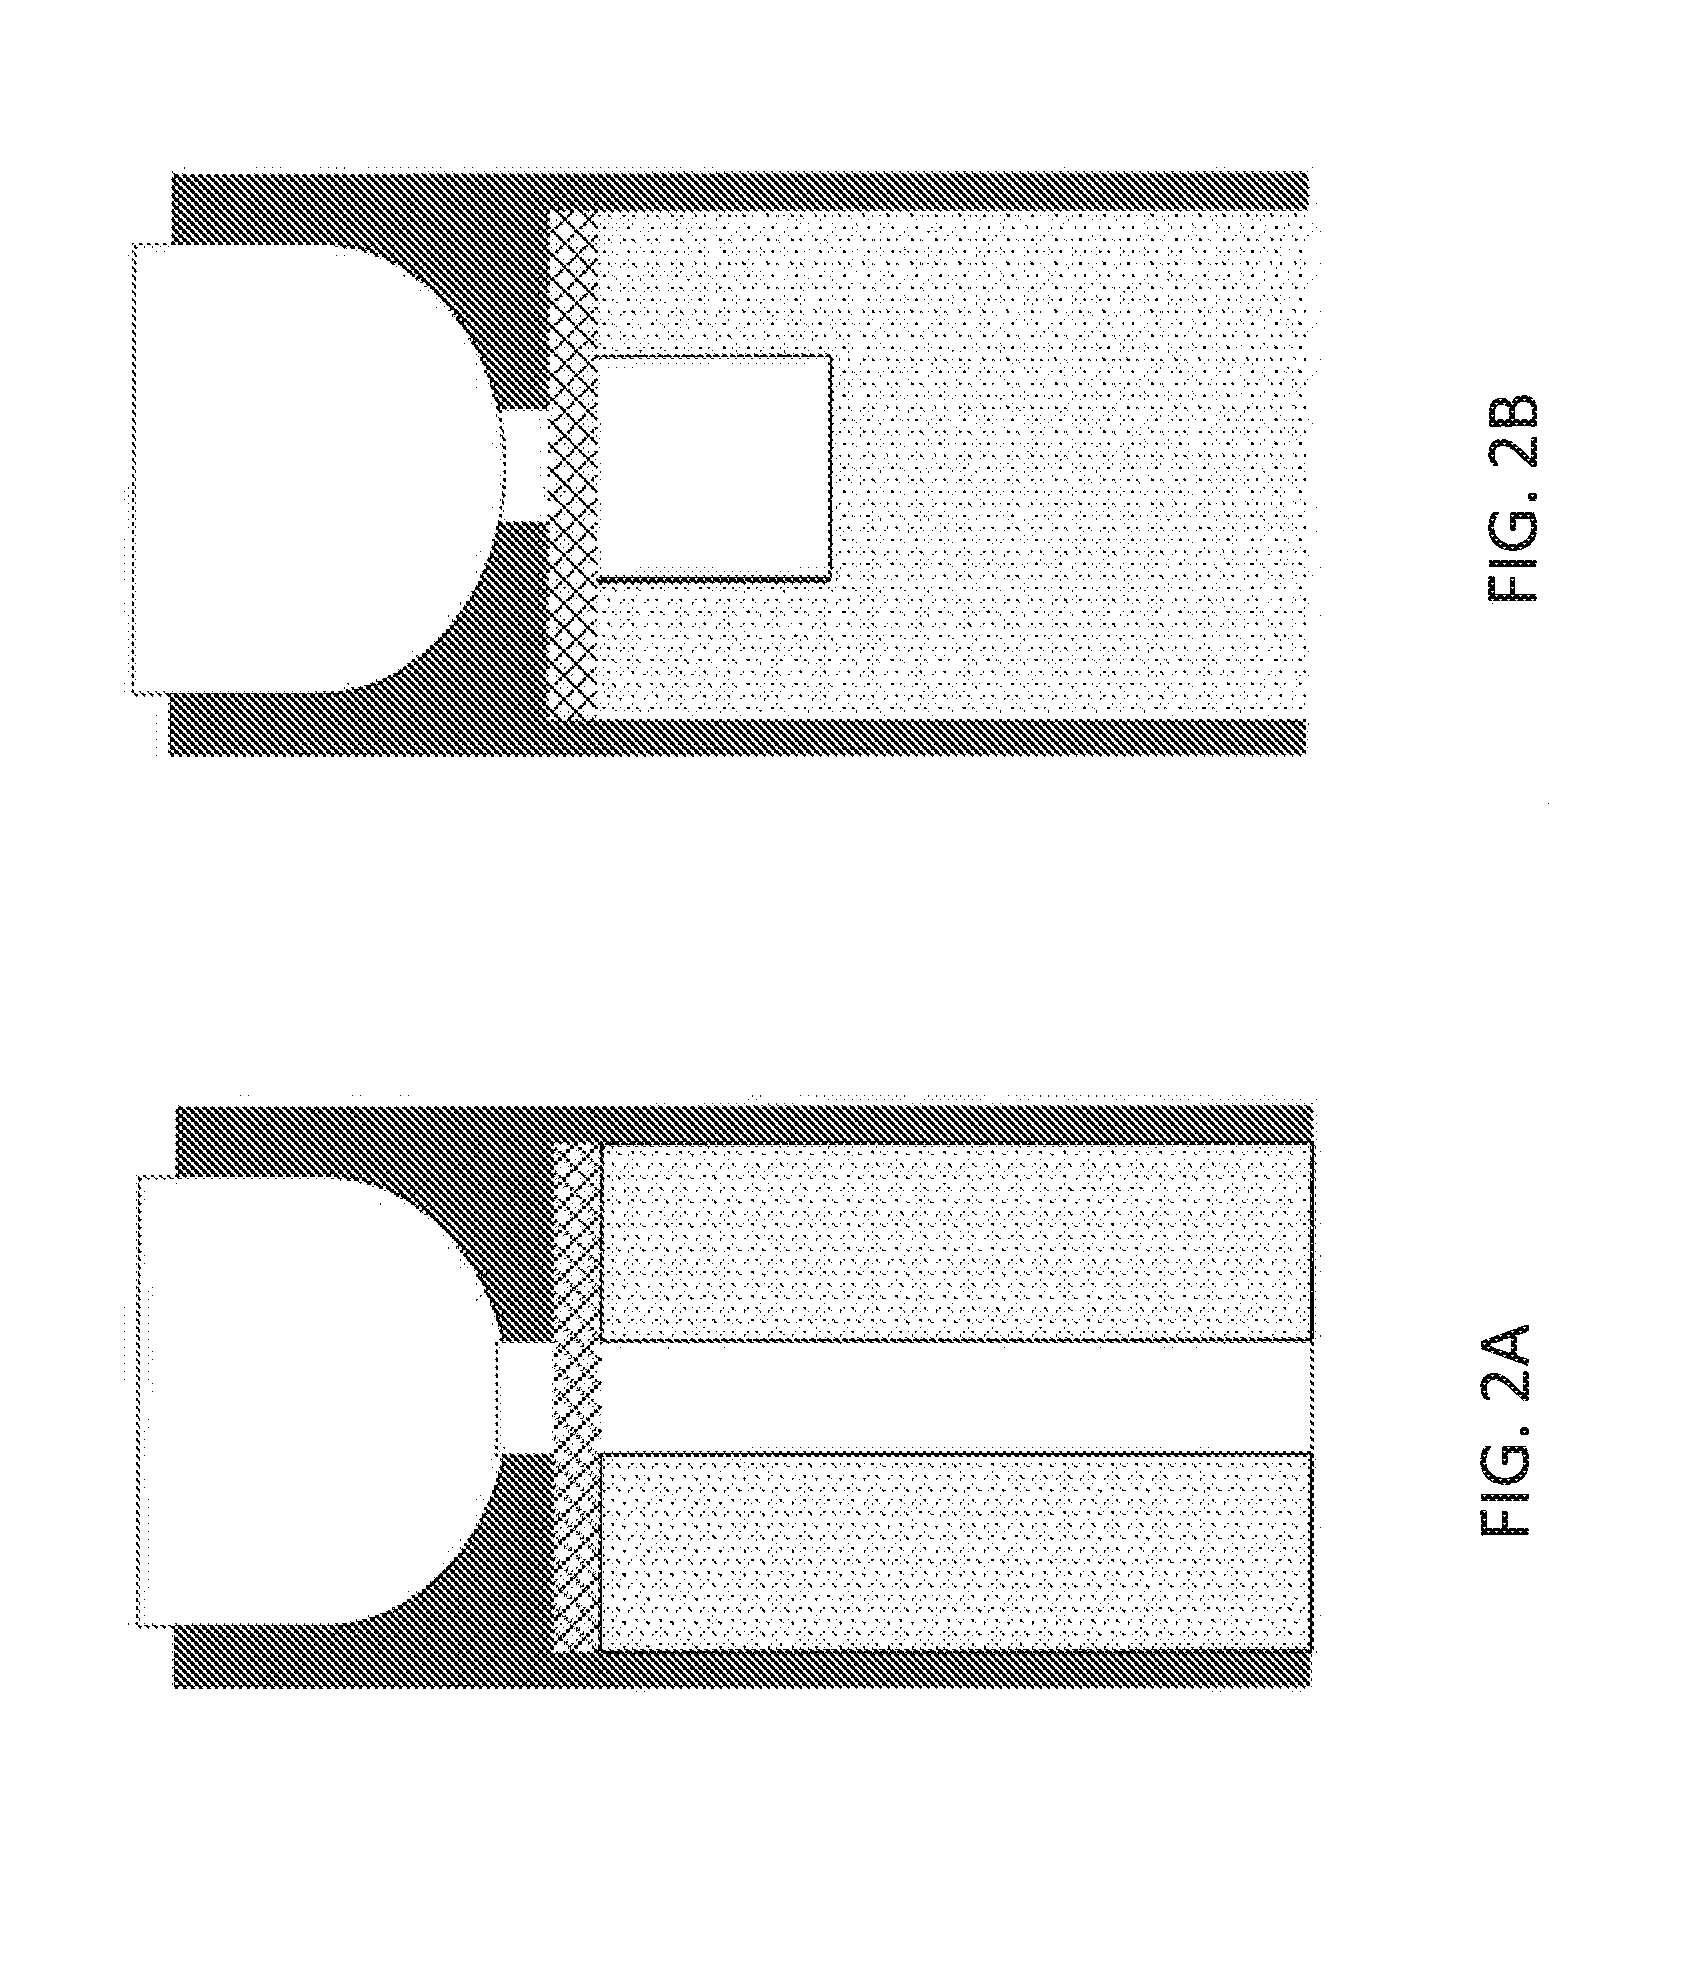 Method and apparatus for biomolecule analysis